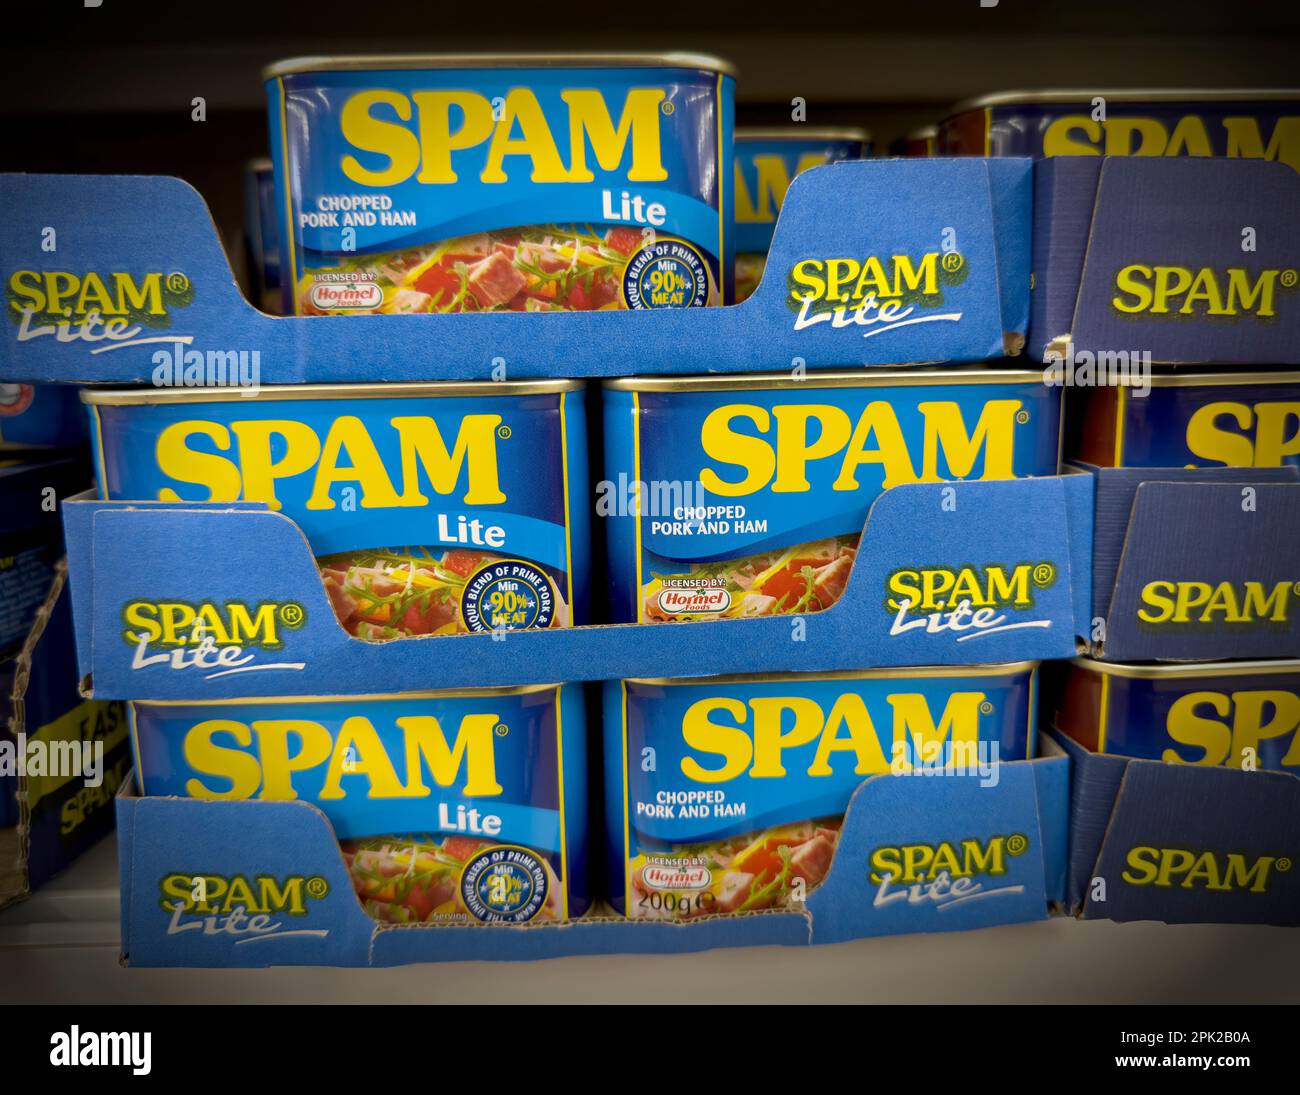 Tins of Spam Lite, chopped pork and ham, licensed by Hormel Foods Stock Photo